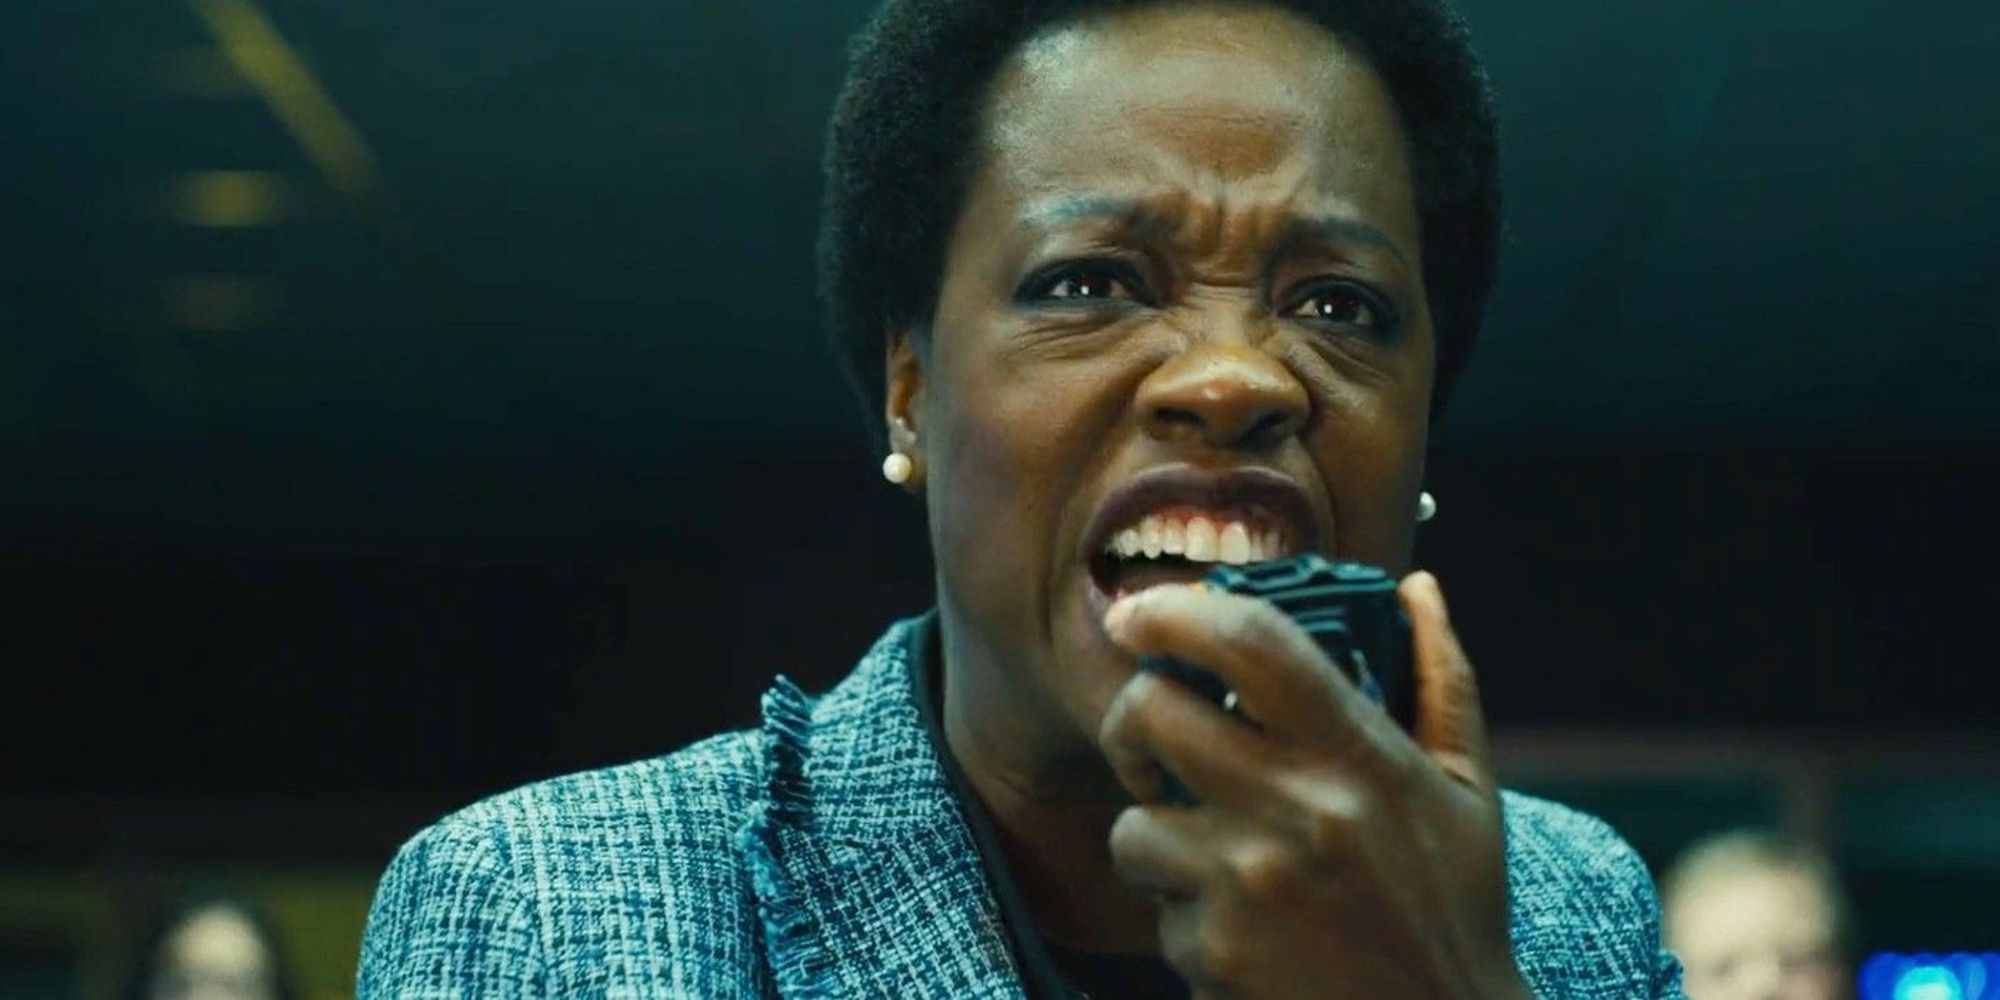 Amanda Waller yelling into a radio to Task Force X in James Gunn's The Suicide Squad (2021)